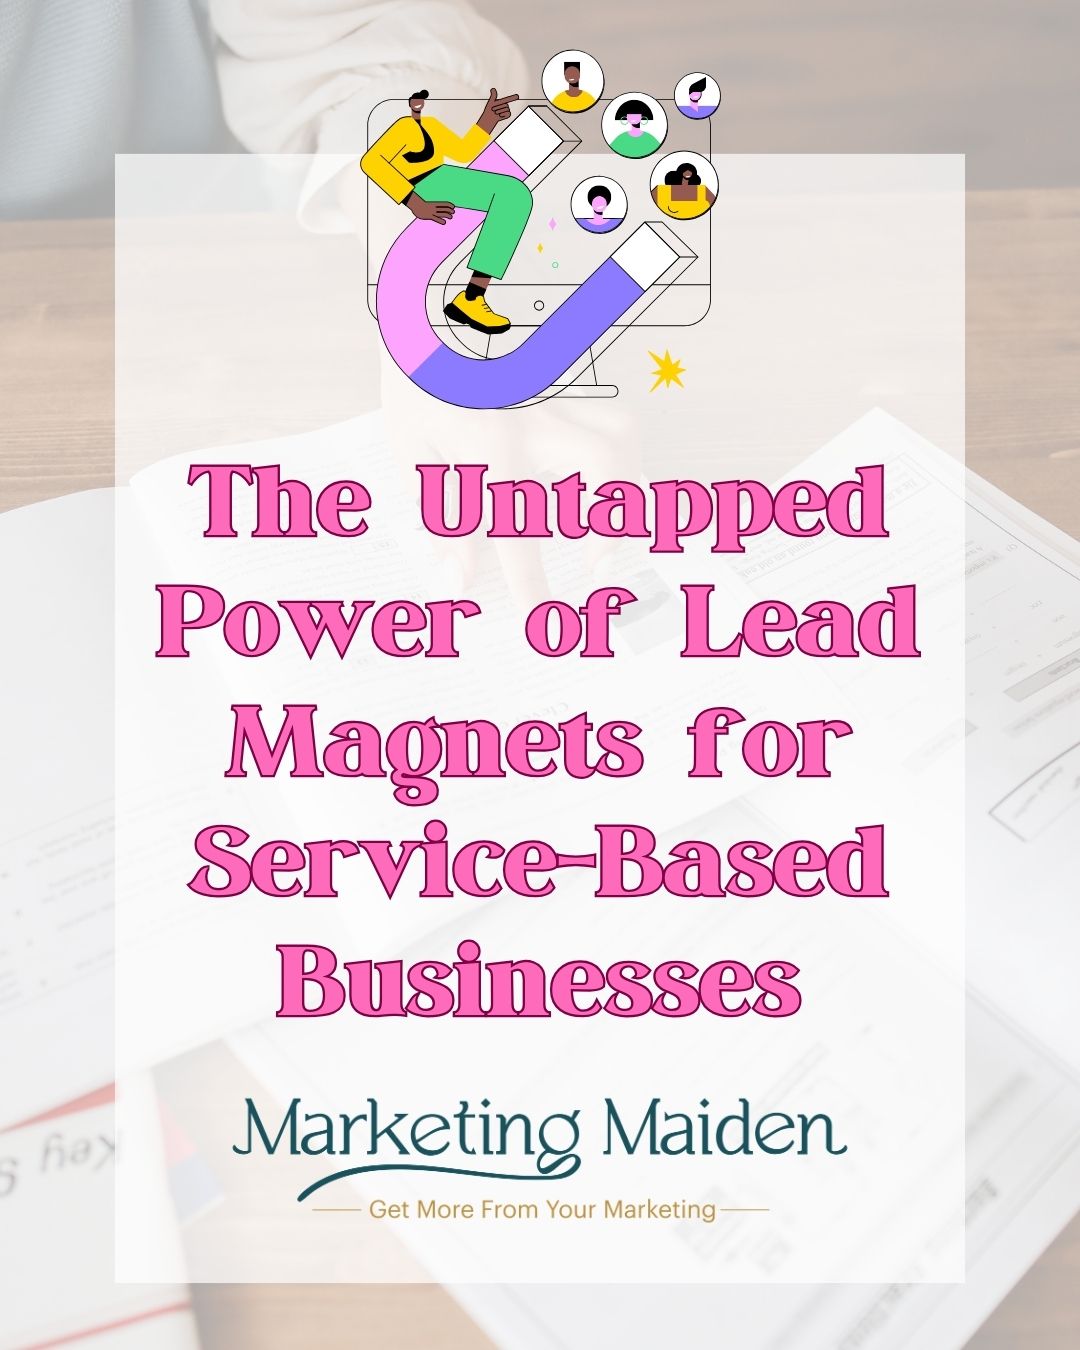 The Untapped Power of Lead Magnets for Service-Based Businesses